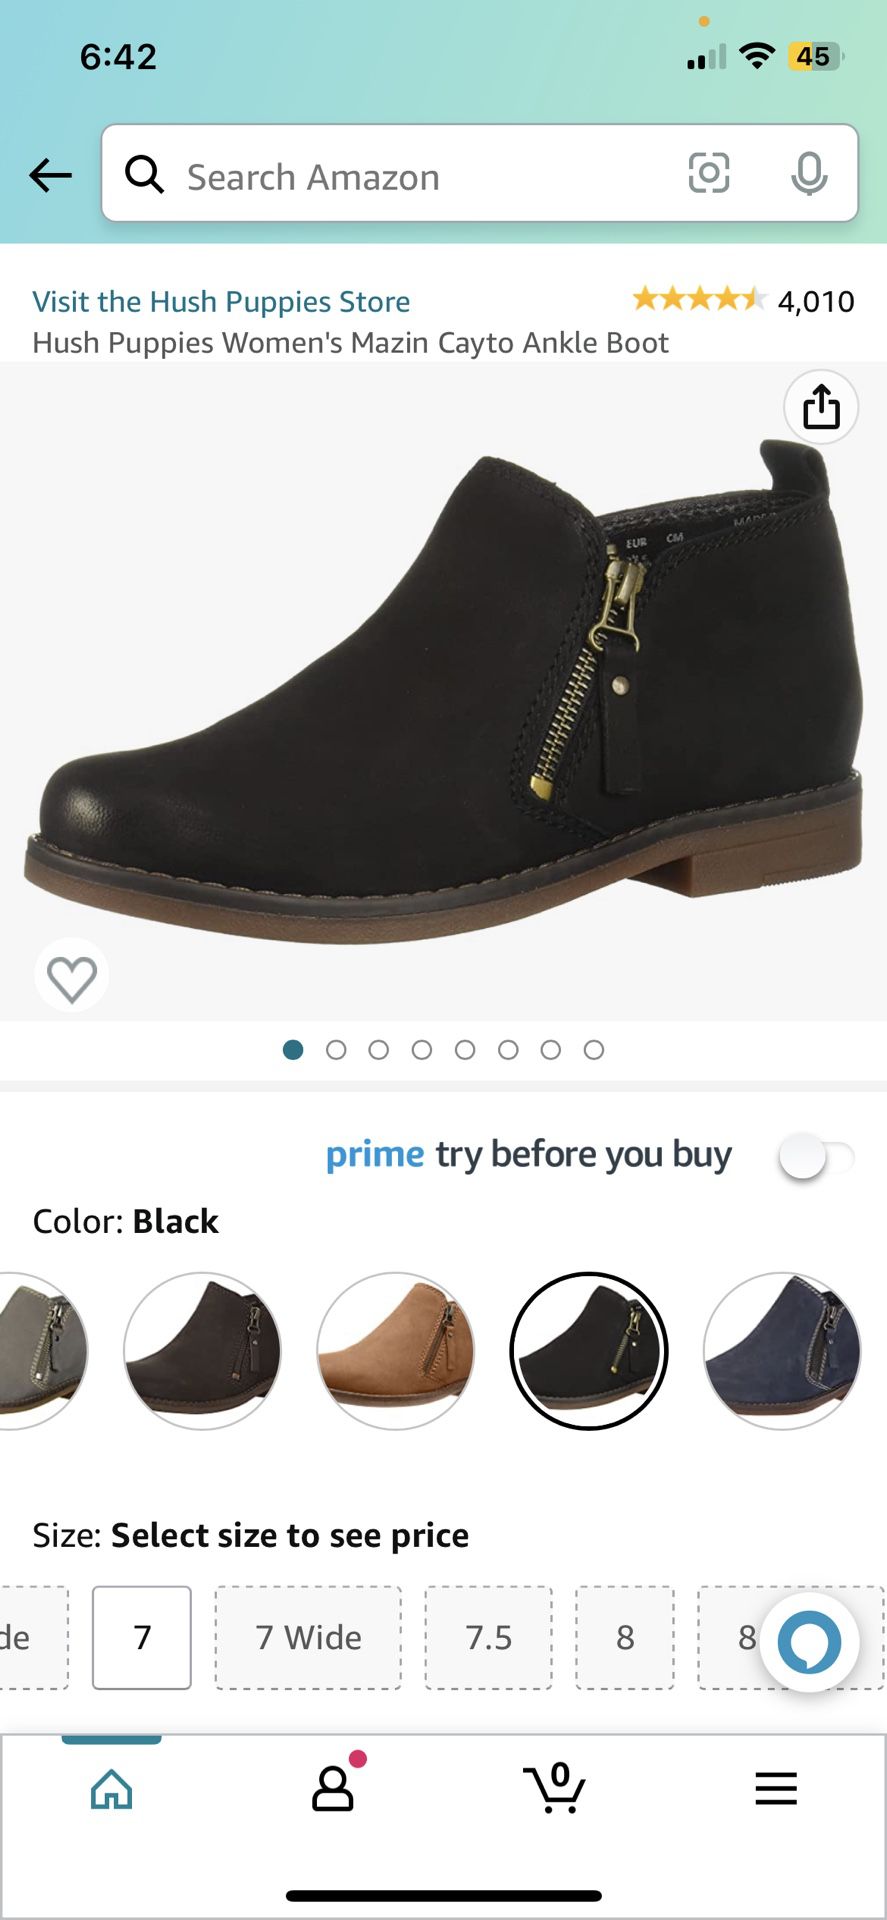 NEW Women’s Ankle Boots 